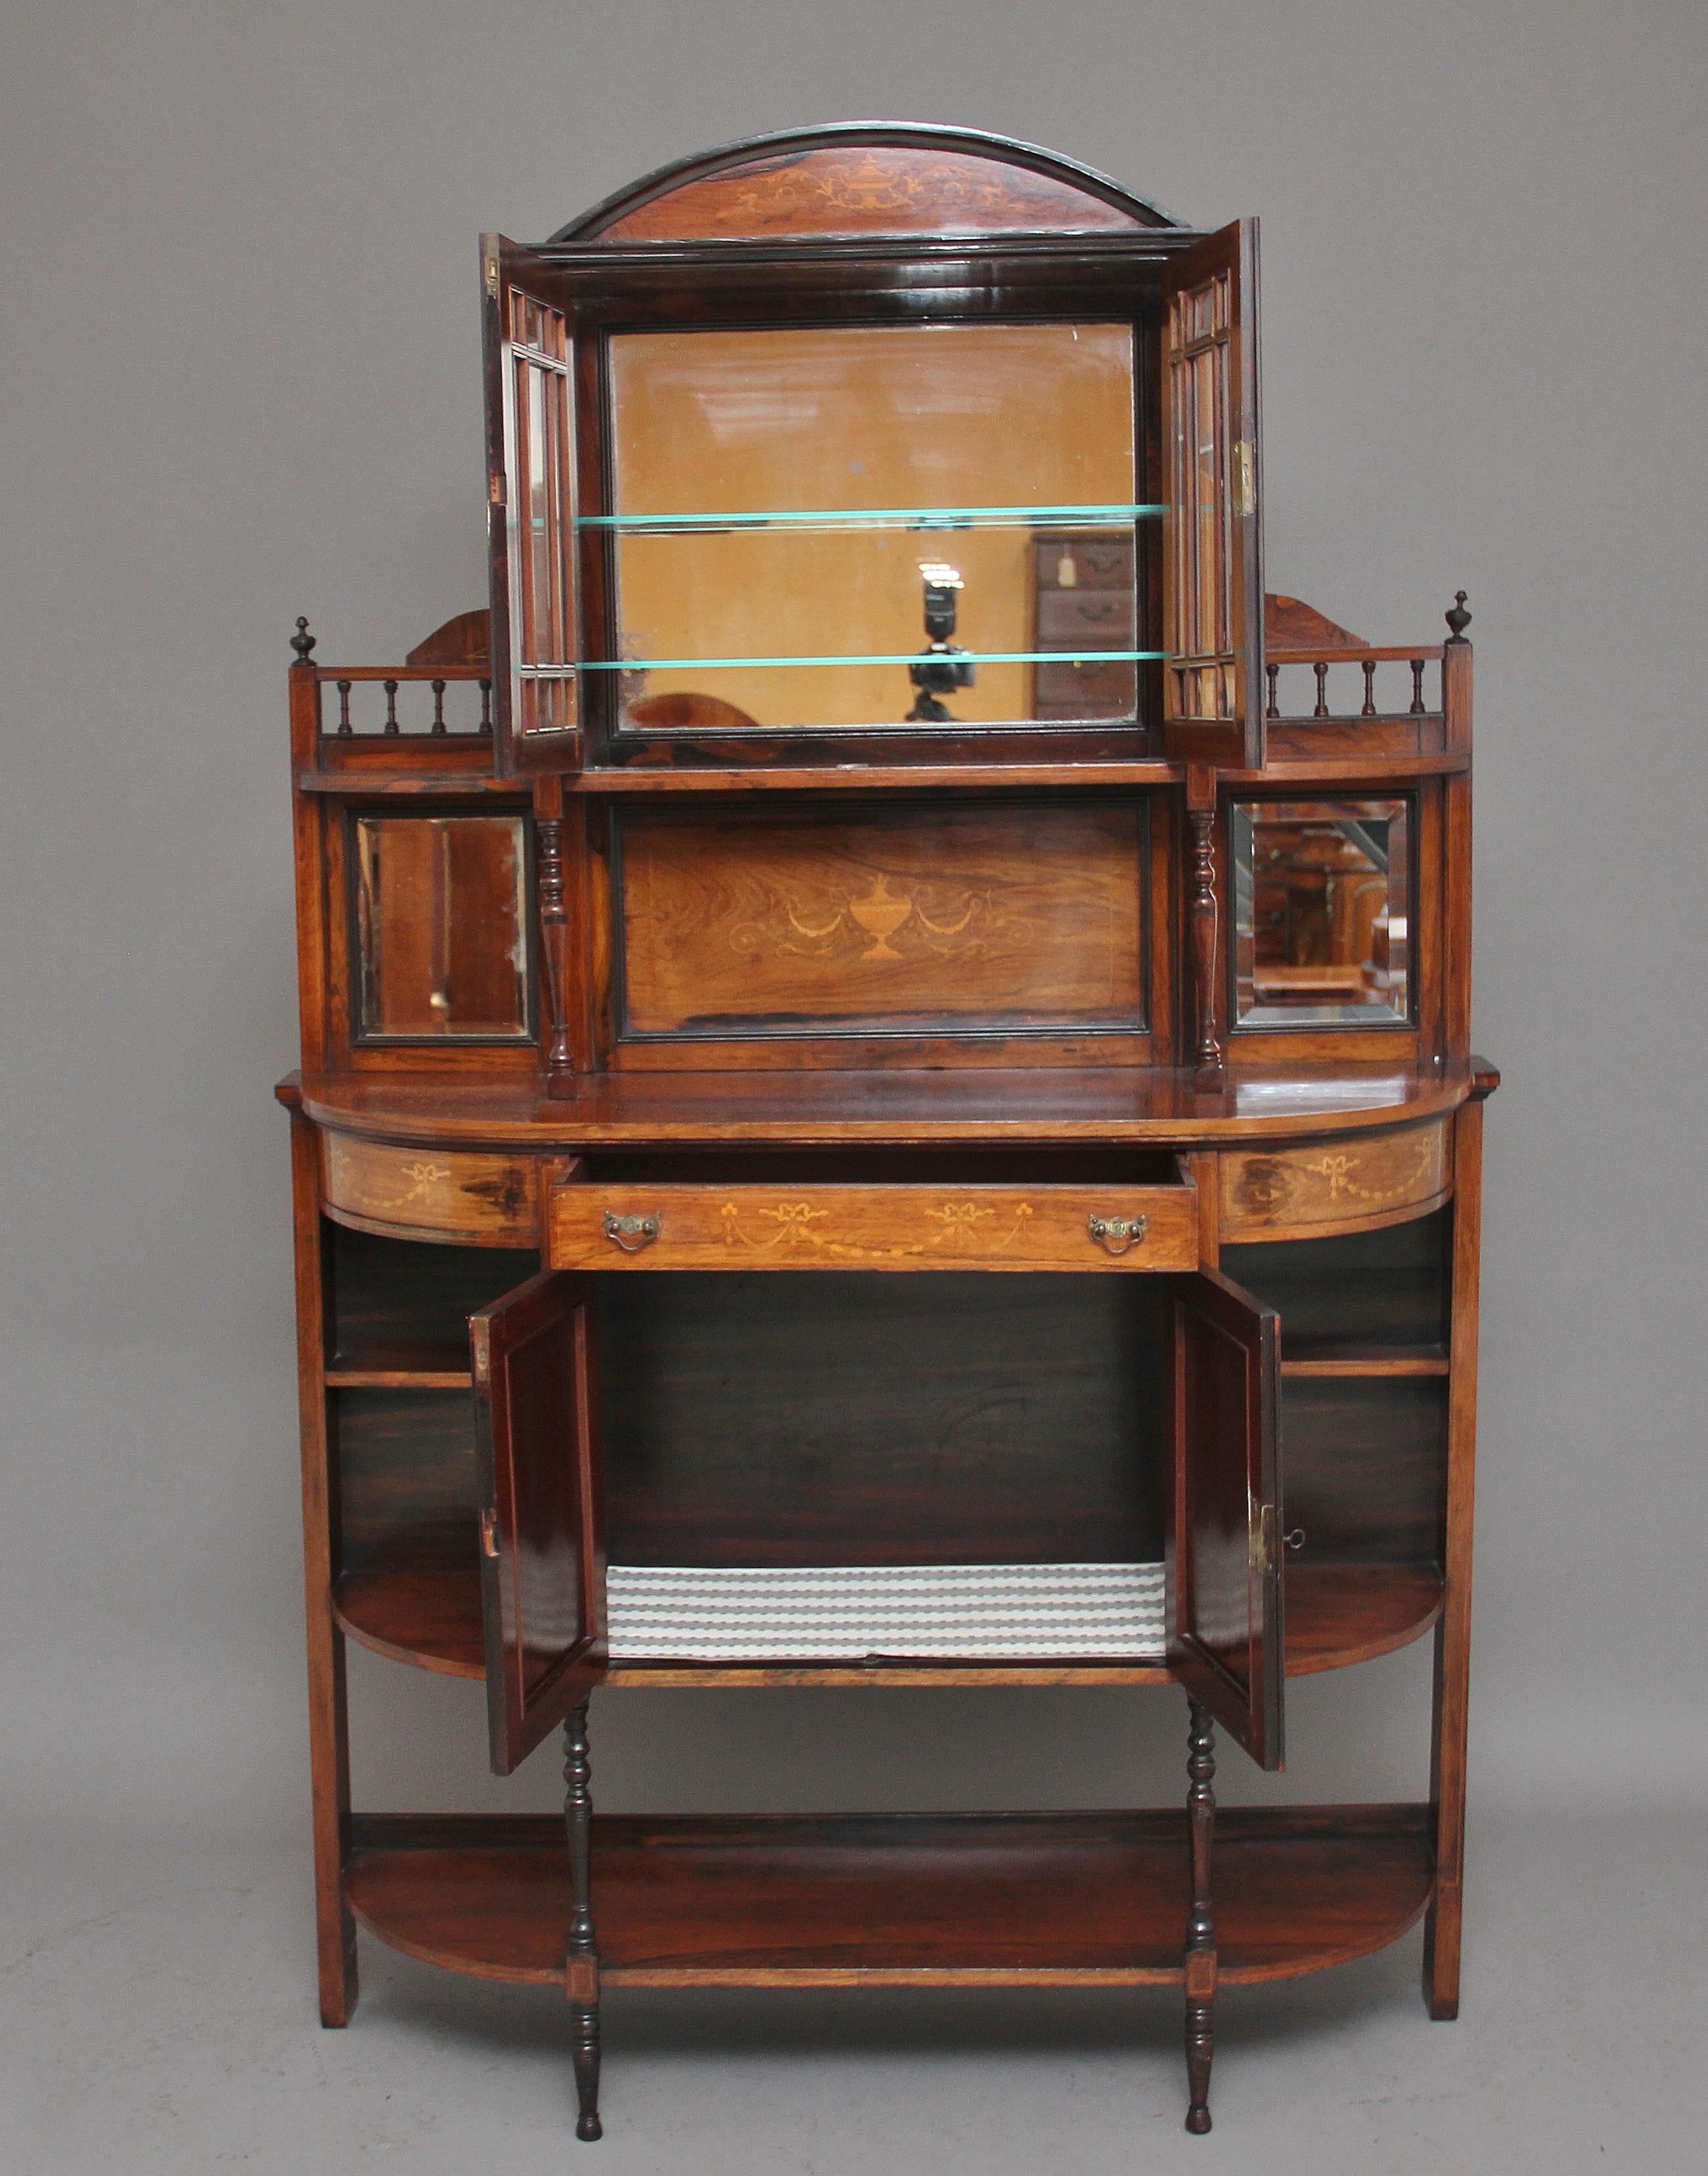 A lovely quality 19th century Sheraton revival rosewood and inlaid cabinet, consisting of an arrangement of doors, shelves and mirrors, wonderful quality inlay on the door and drawer fronts as well as the back panel, finely turned column supports,